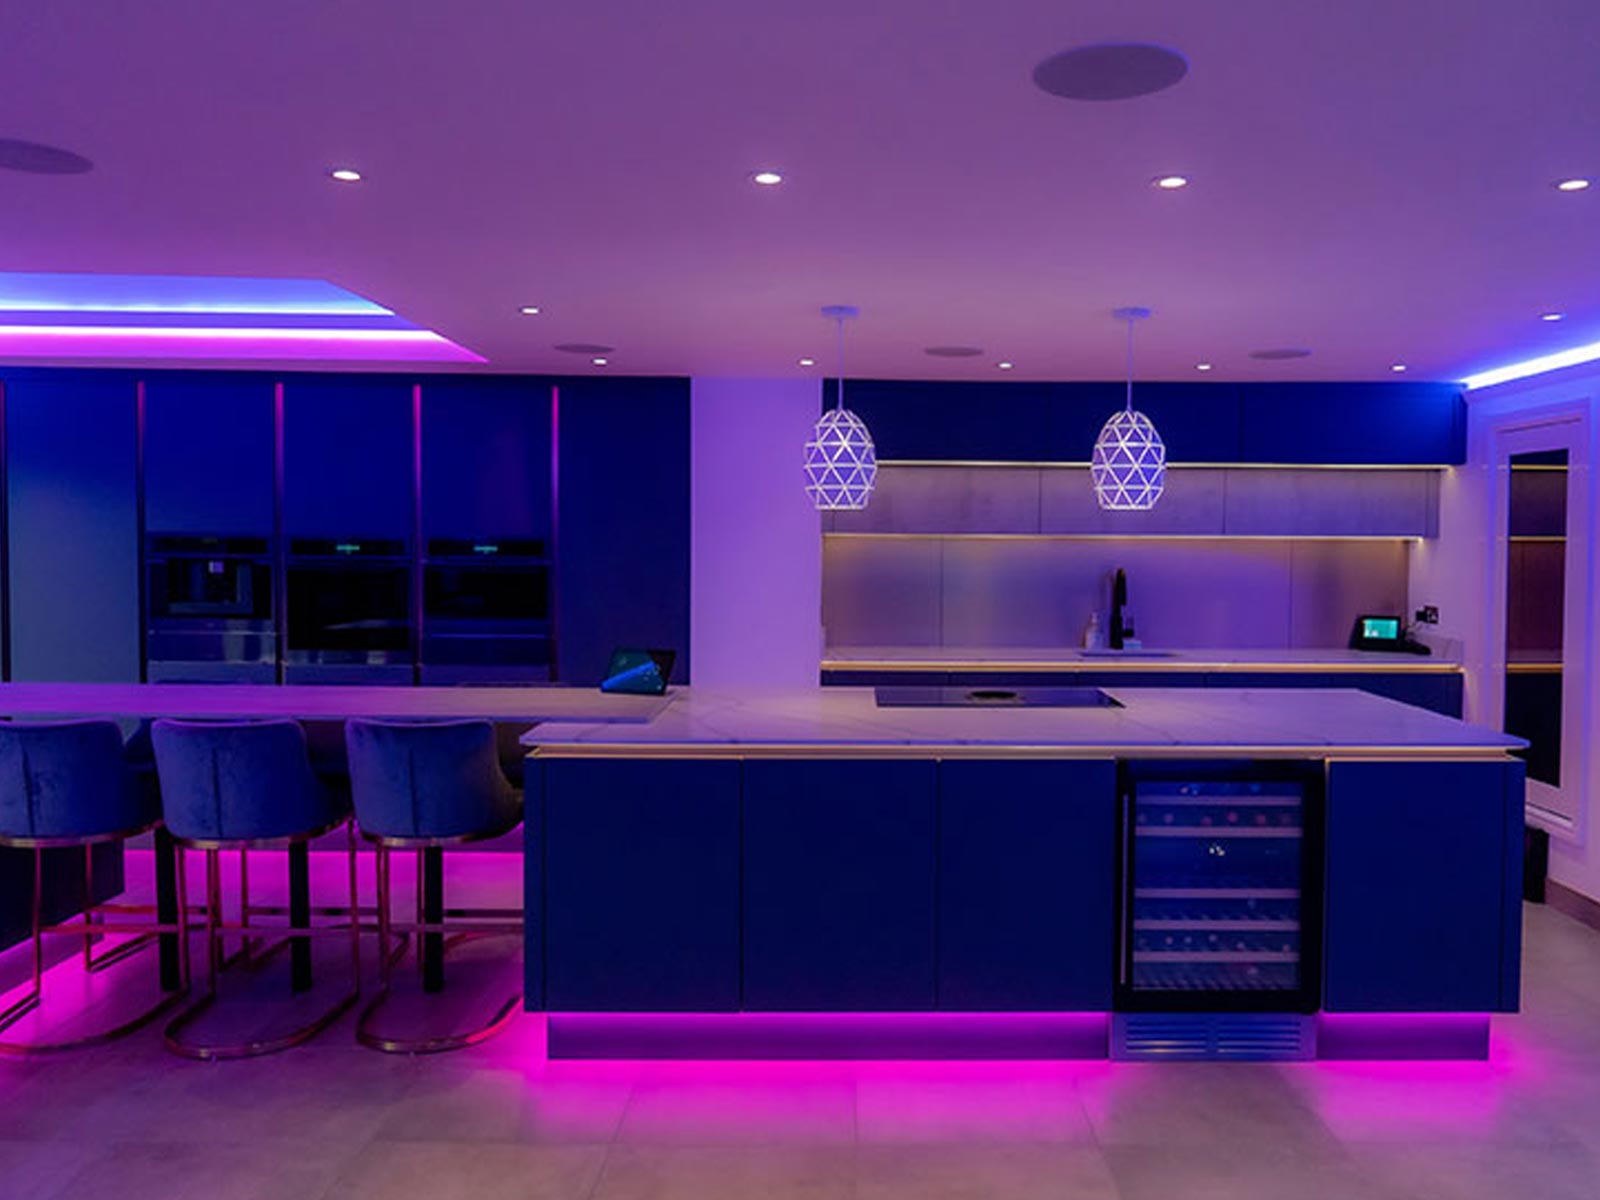 Home bar with kitchen island lighting and kitchen strip lights